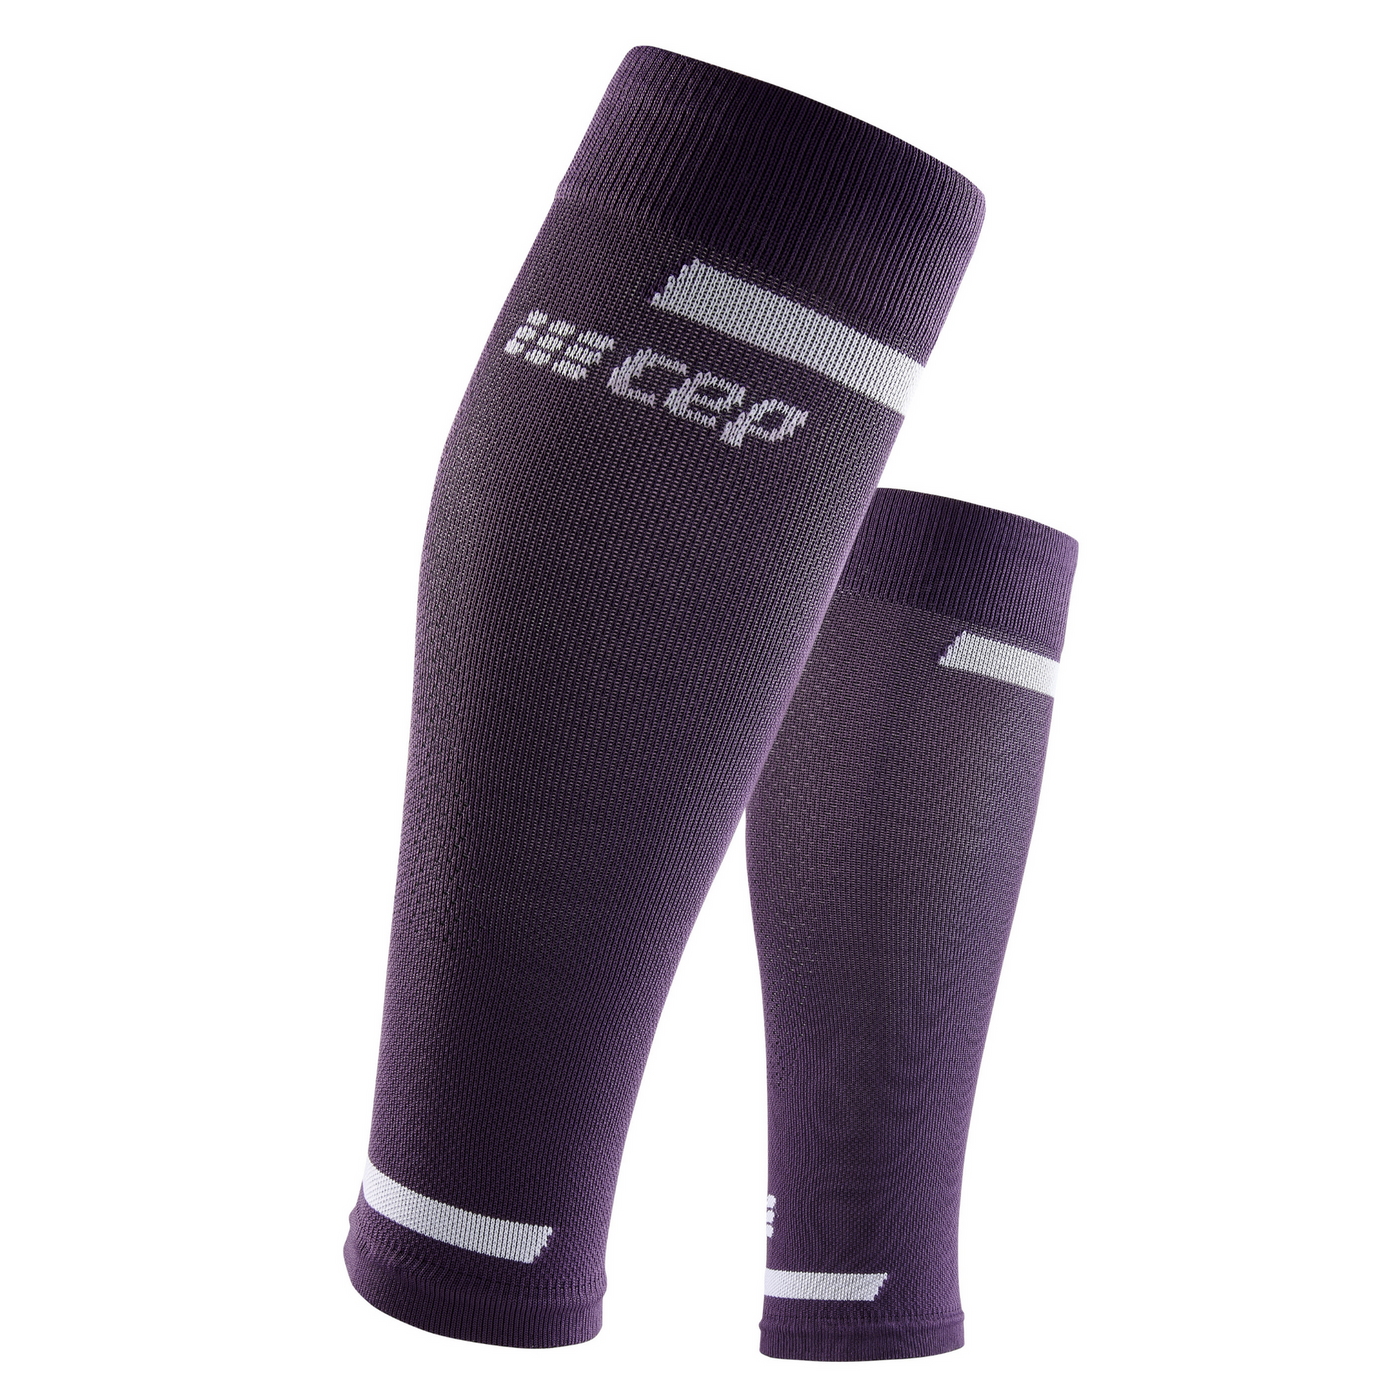 CEP The Run Compression 4.0 Women's Calf Sleeves (Violet)